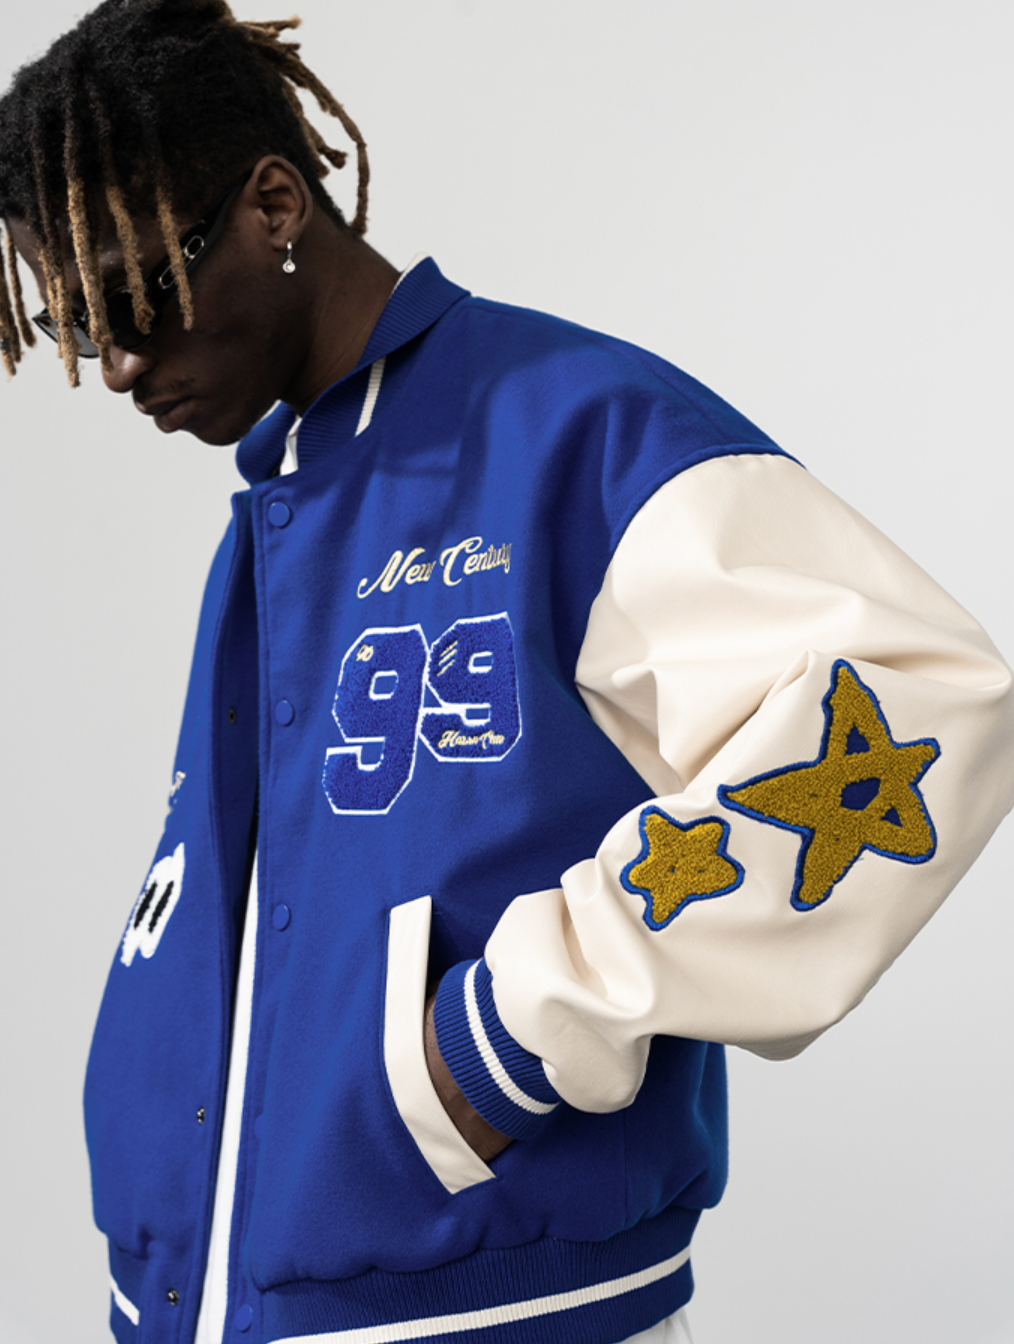 Harsh and Cruel Embroidered stars Clouds Varsity Jacket